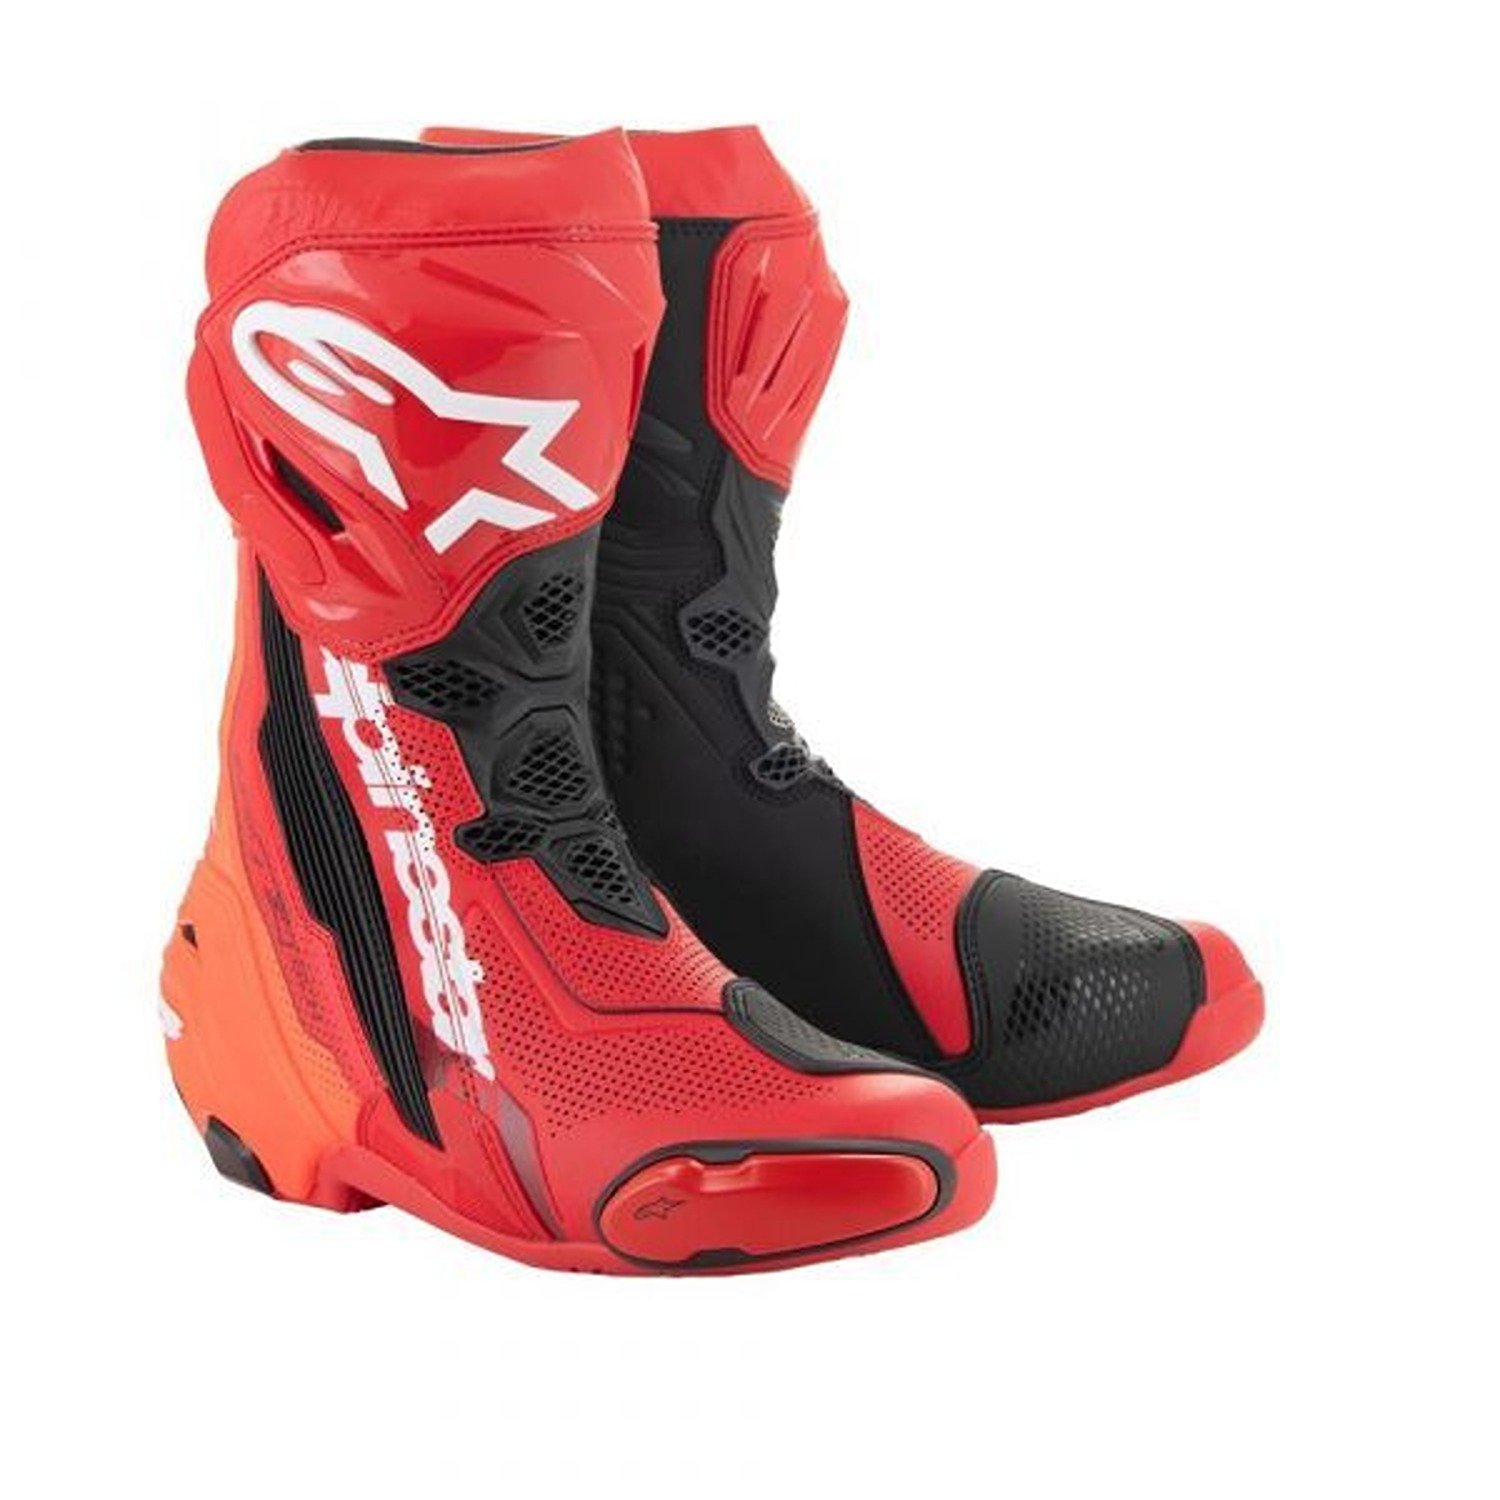 Image of EU Alpinestars Supertech R Vented Boots Bright Red Red Fluo Taille 46